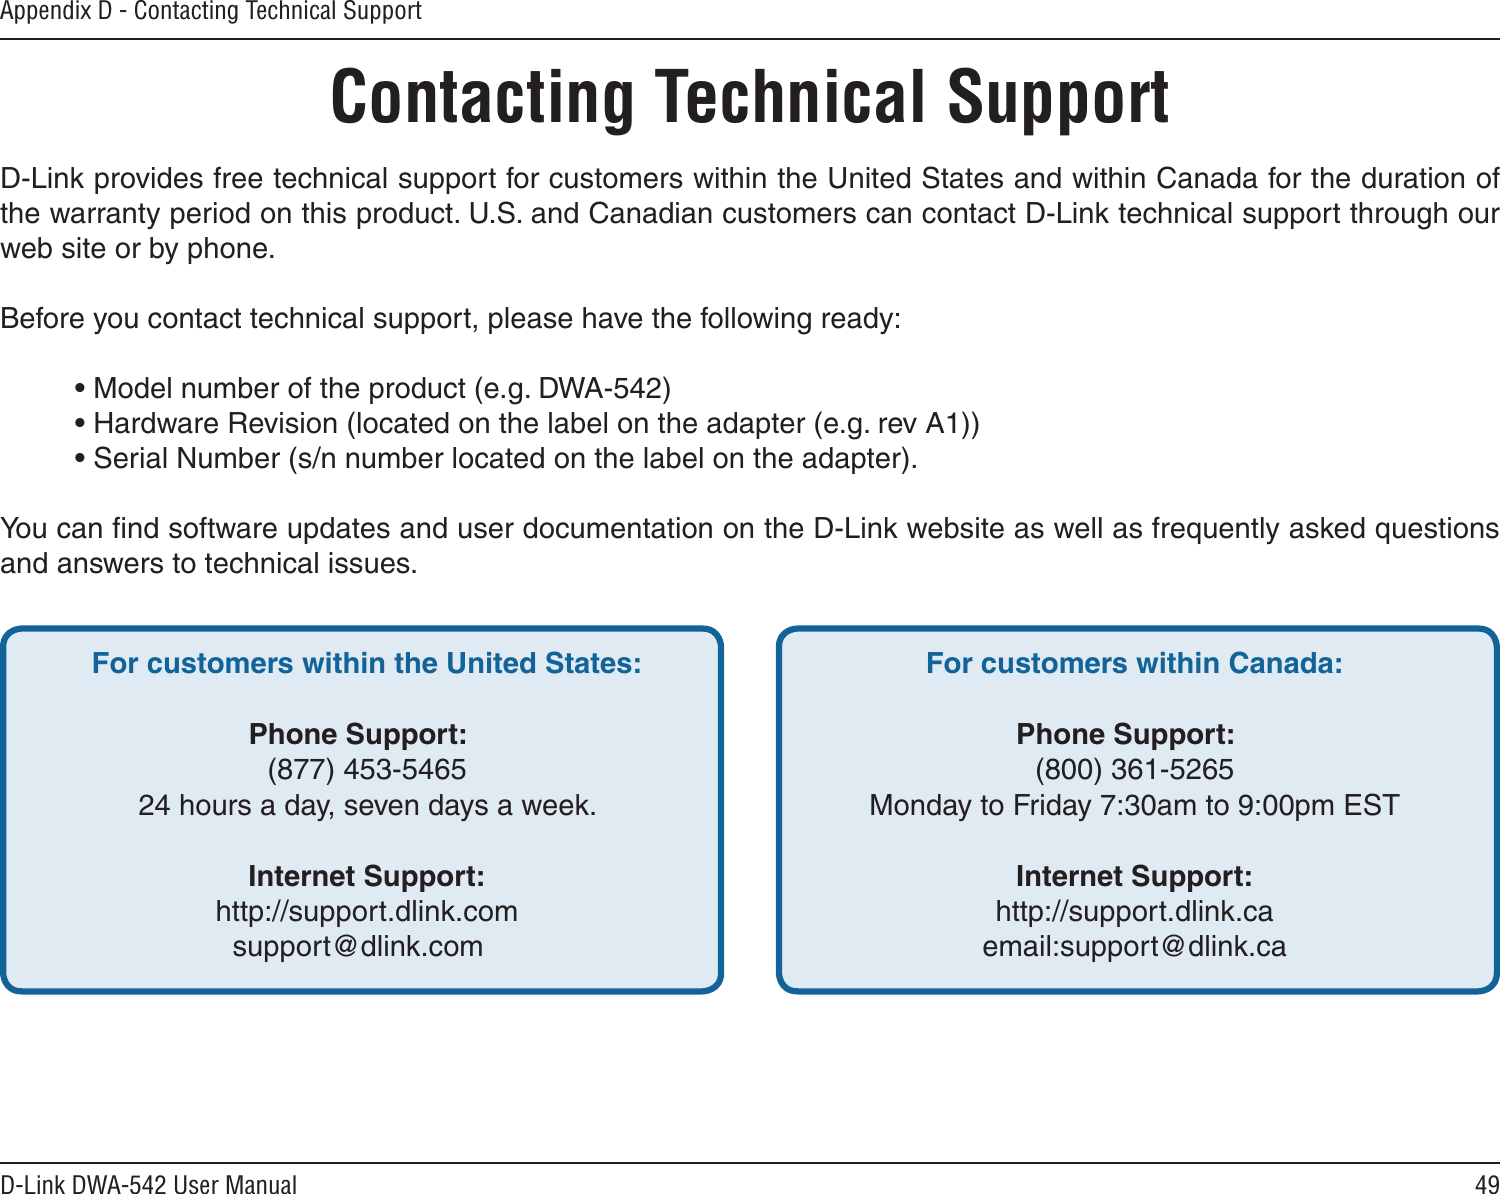 49D-Link DWA-542 User ManualAppendix D - Contacting Technical SupportContacting Technical SupportD-Link provides free technical support for customers within the United States and within Canada for the duration of the warranty period on this product. U.S. and Canadian customers can contact D-Link technical support through our web site or by phone.Before you contact technical support, please have the following ready:  • Model number of the product (e.g. DWA-542)  • Hardware Revision (located on the label on the adapter (e.g. rev A1))  • Serial Number (s/n number located on the label on the adapter). You can ﬁnd software updates and user documentation on the D-Link website as well as frequently asked questions and answers to technical issues.For customers within the United States: Phone Support:  (877) 453-5465  24 hours a day, seven days a week. Internet Support:  http://support.dlink.comsupport@dlink.com For customers within Canada: Phone Support:  (800) 361-5265  Monday to Friday 7:30am to 9:00pm EST  Internet Support:  http://support.dlink.ca  email:support@dlink.ca